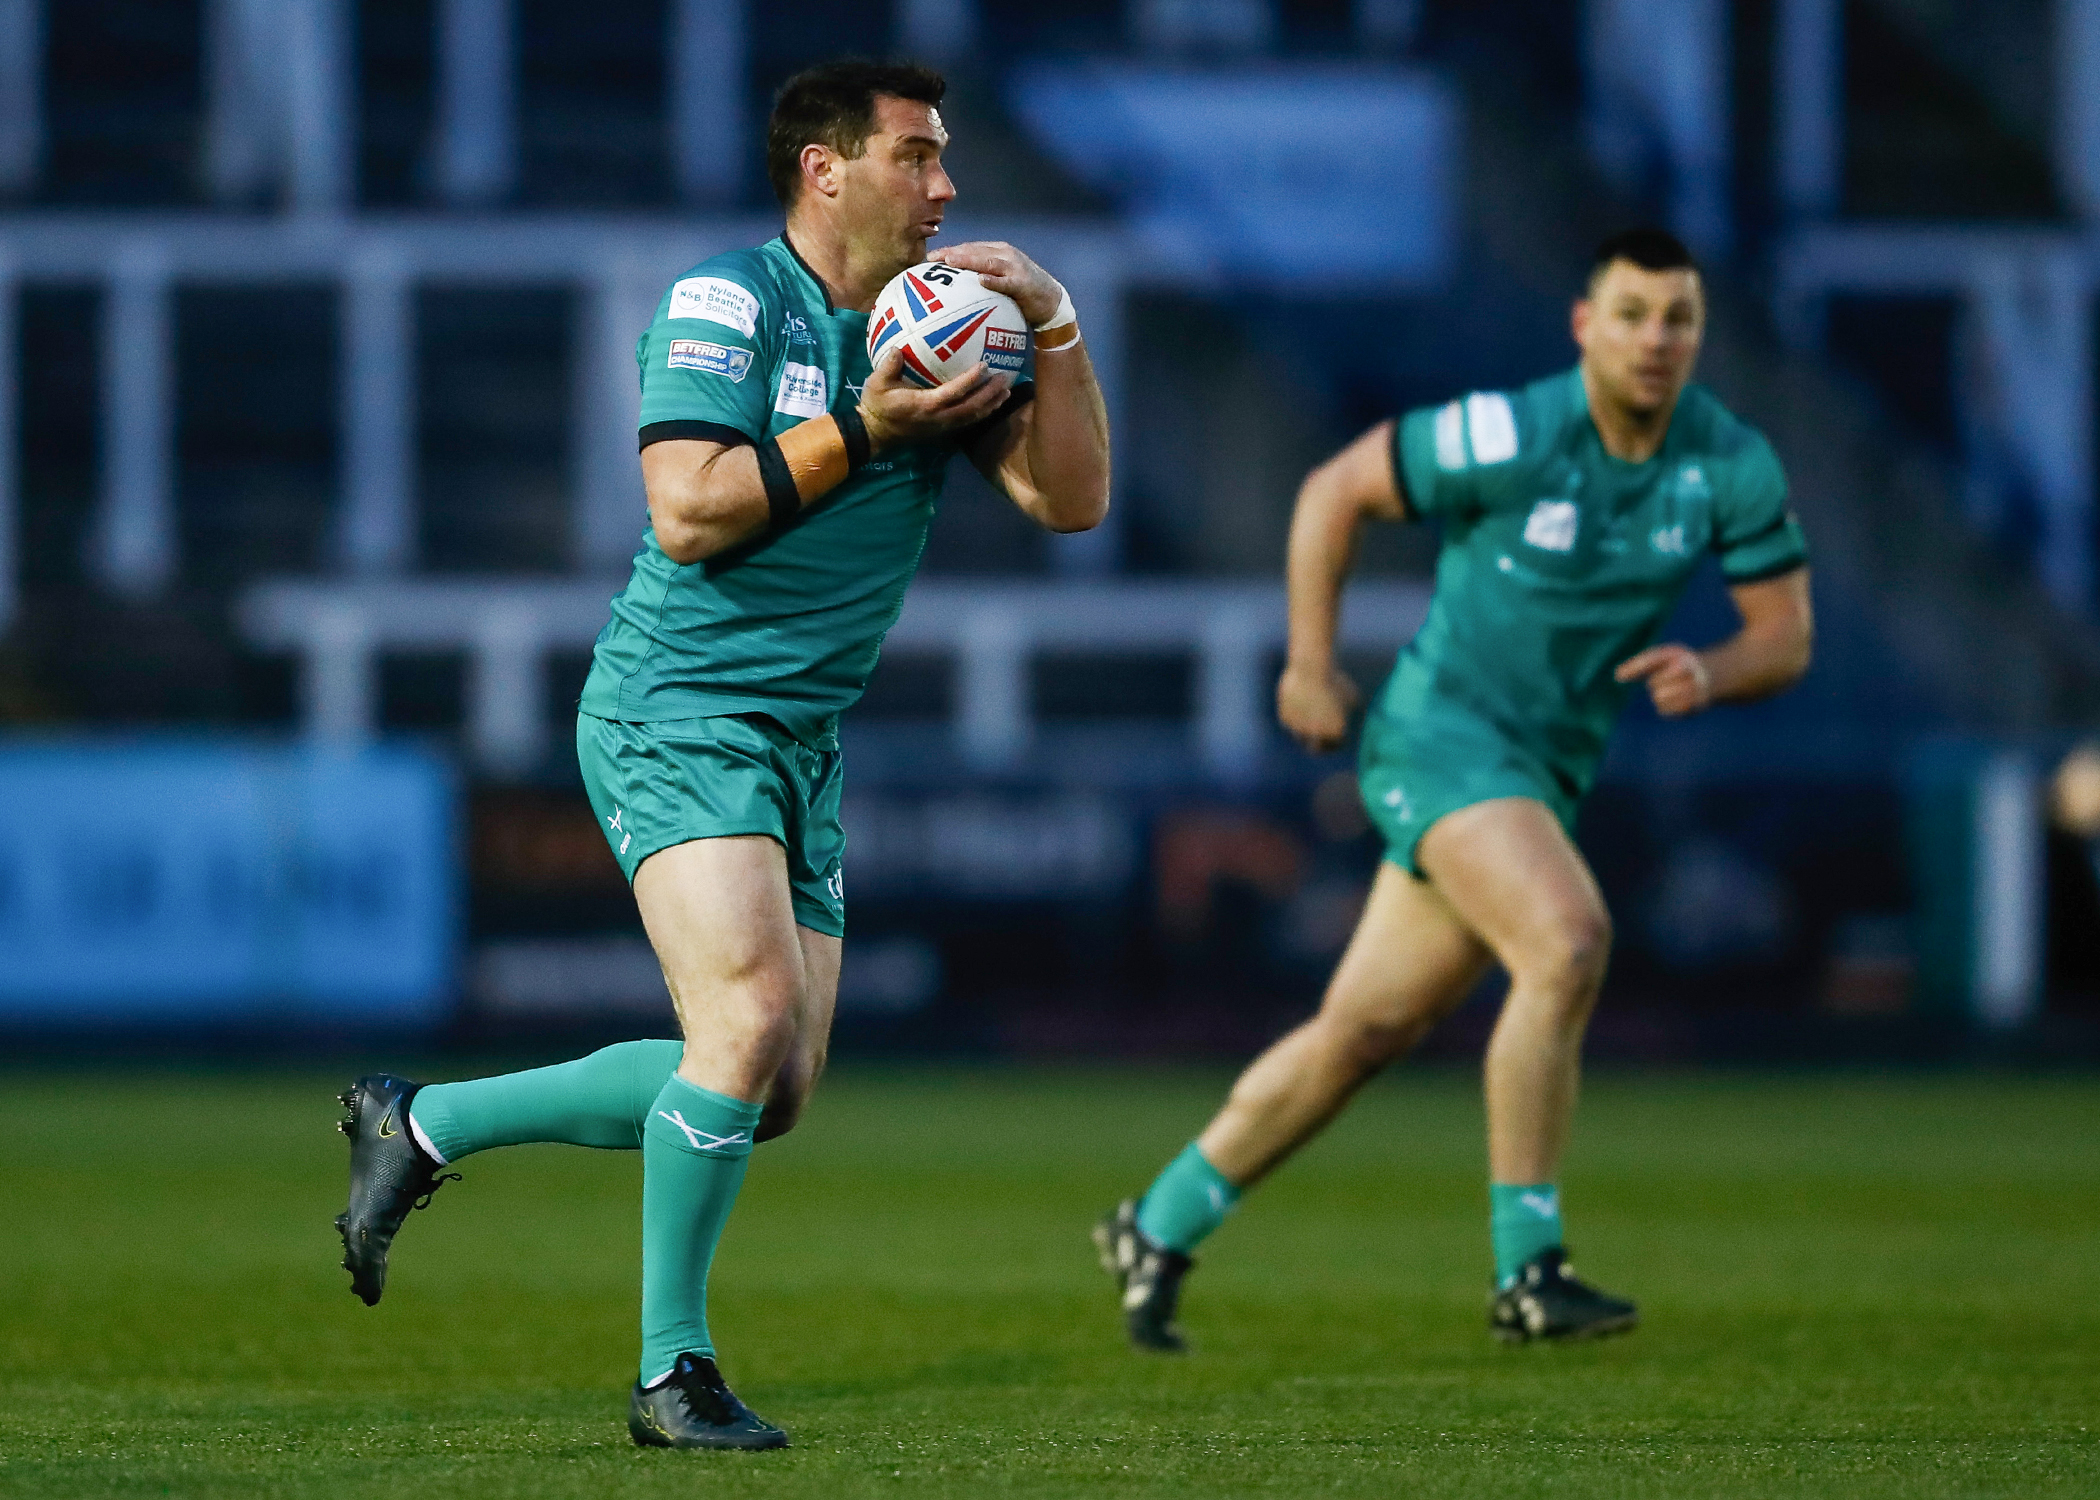 Matty Smith gives assessment of how the team are looking to improve